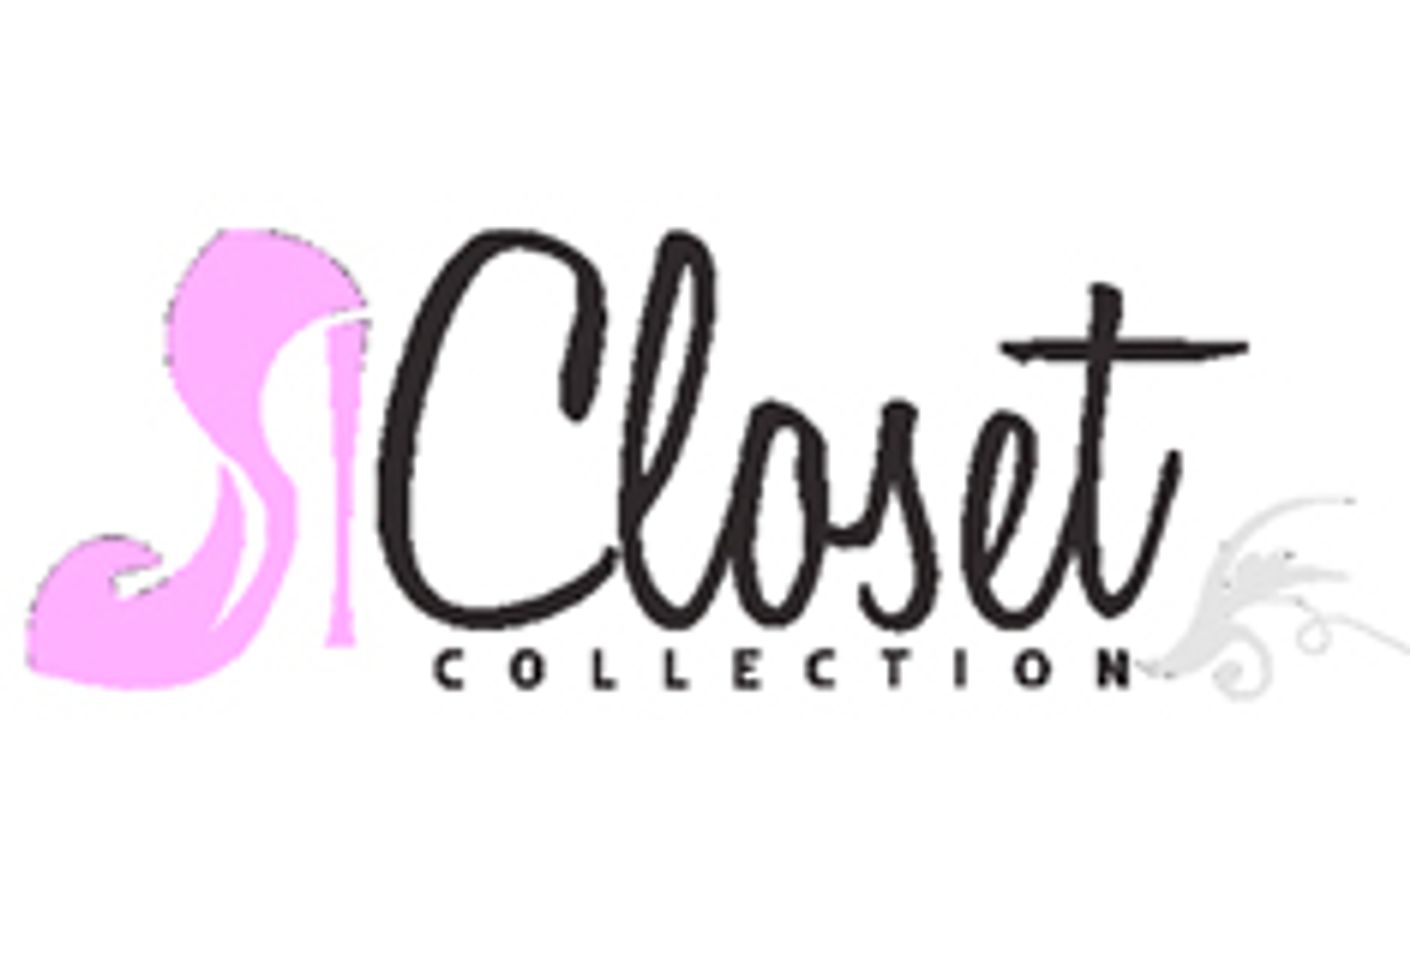 The Closet Collection expands its European presence with Tonga BV